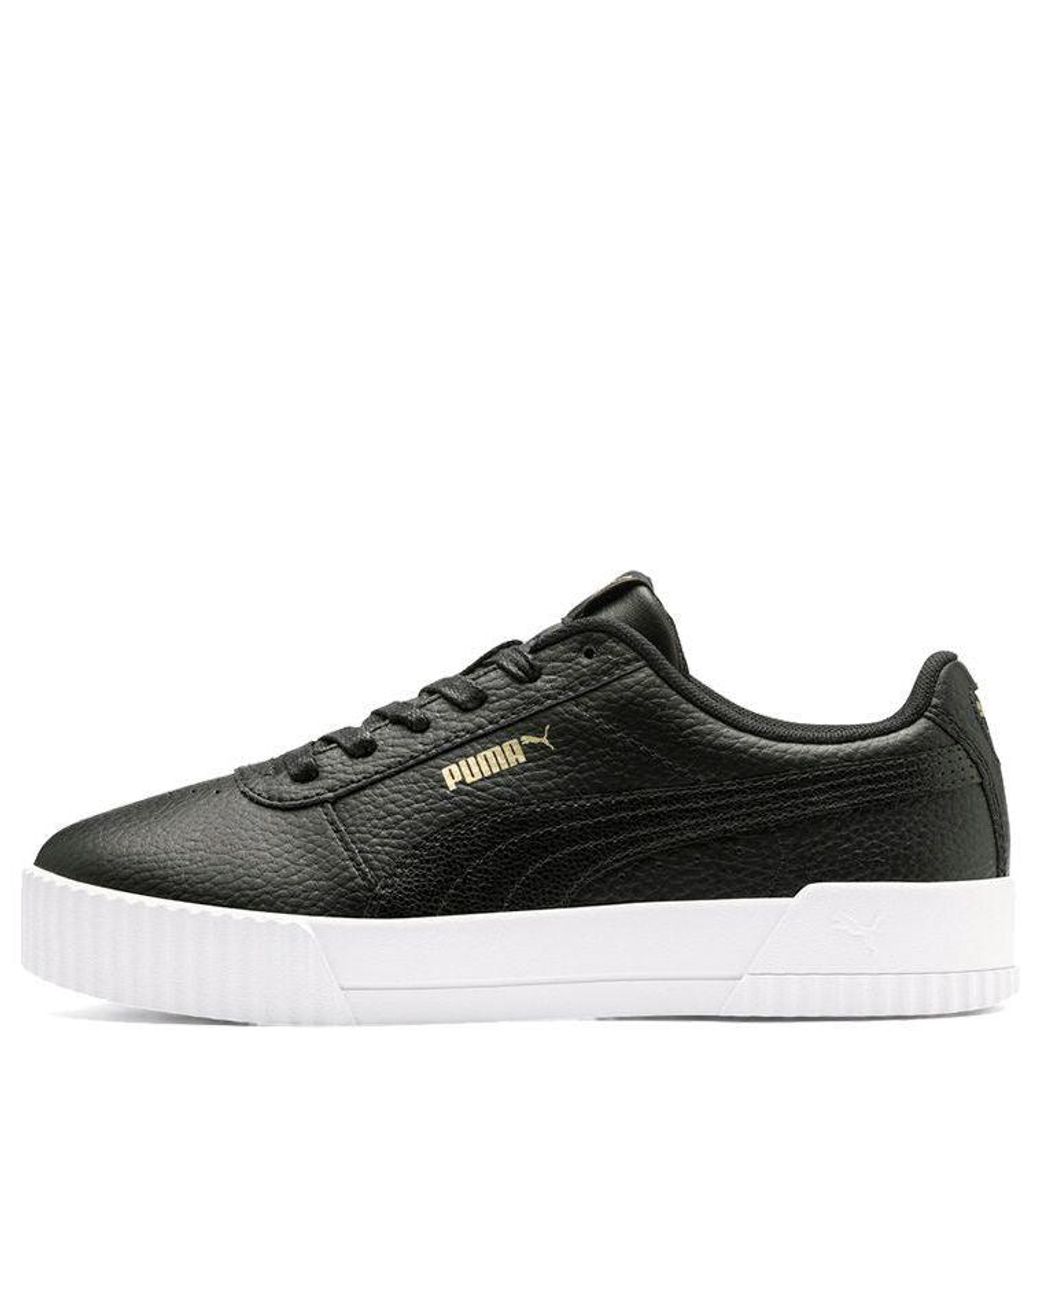 PUMA Carina Lux Black/white Low Sneakers | Lyst